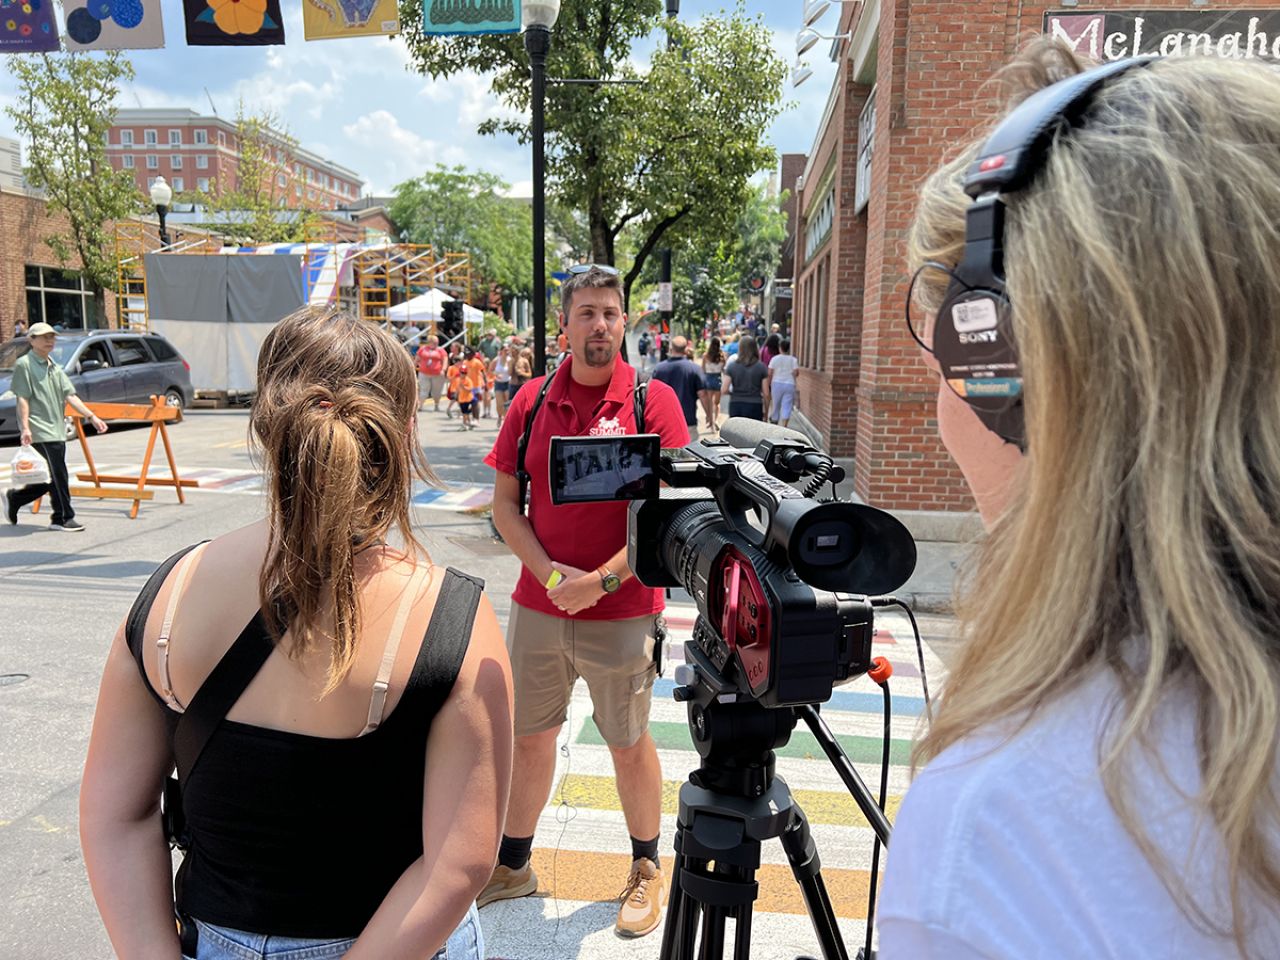 A gentleman in the center of the screen gets interviewed by two students with a camera who are positioned left and right on the image.